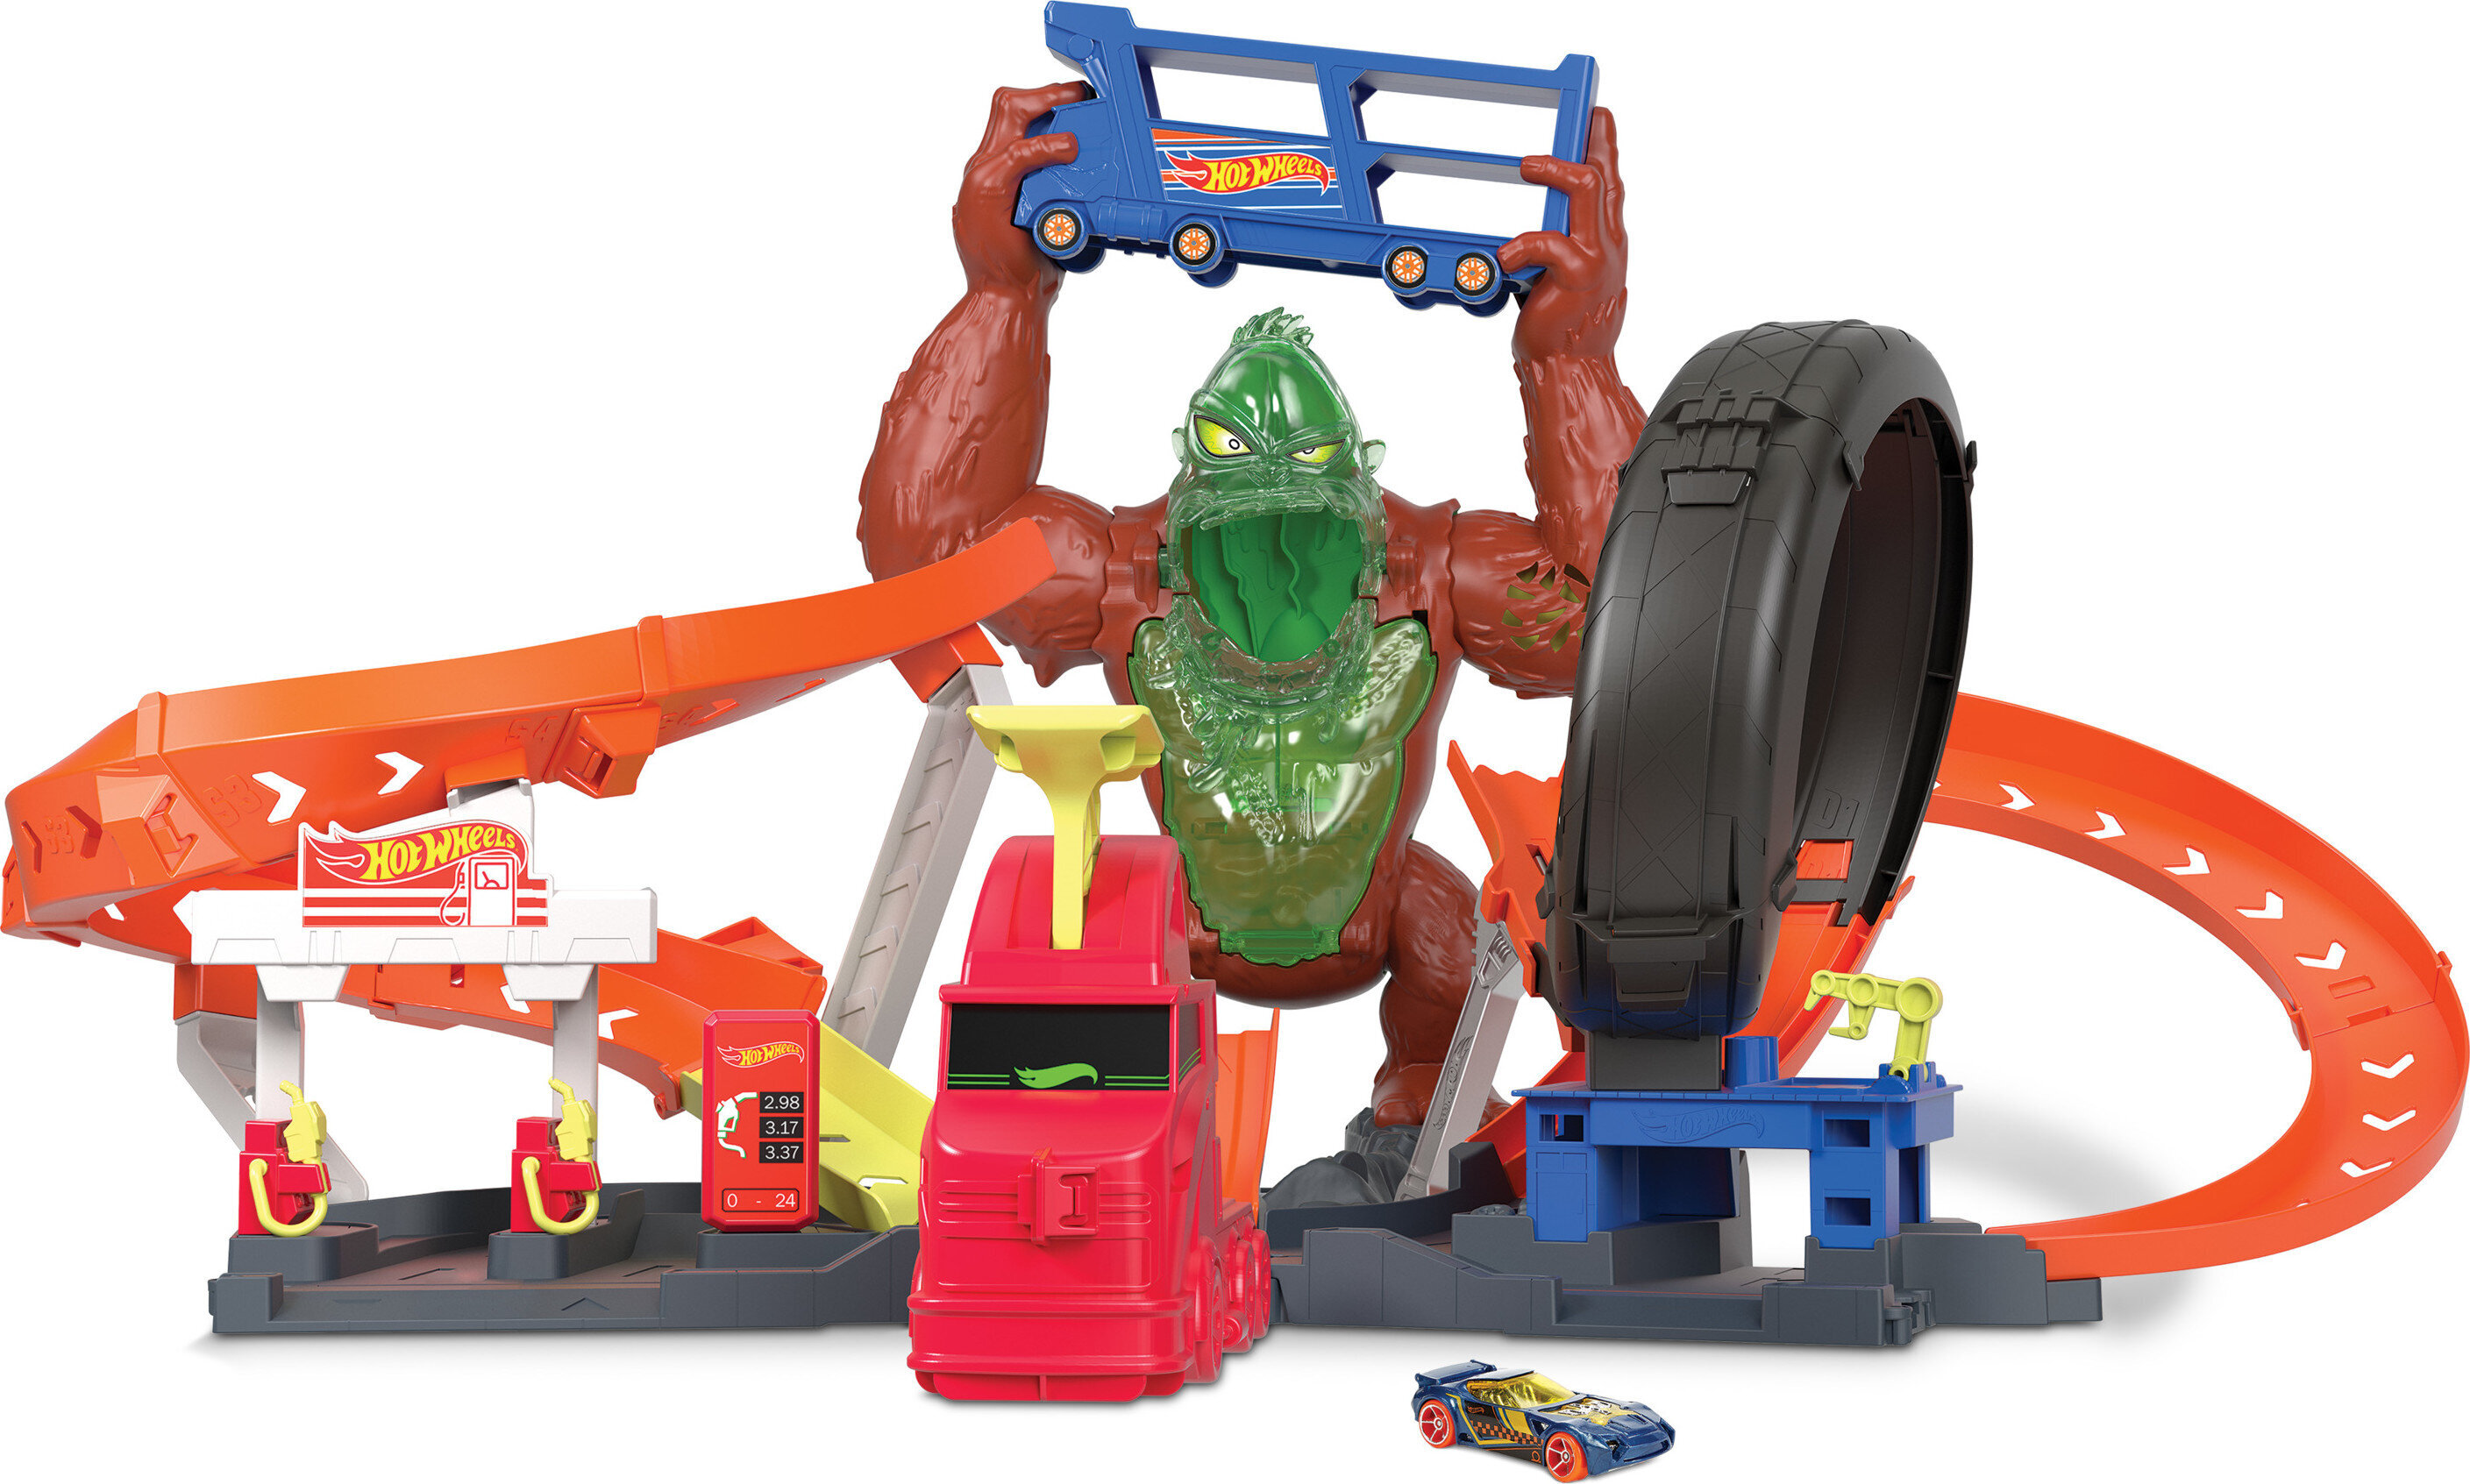 Hot Wheels City Toxic Gorilla Slam Playset & 1:64 Scale Toy Car with Lights & Sounds - image 1 of 7